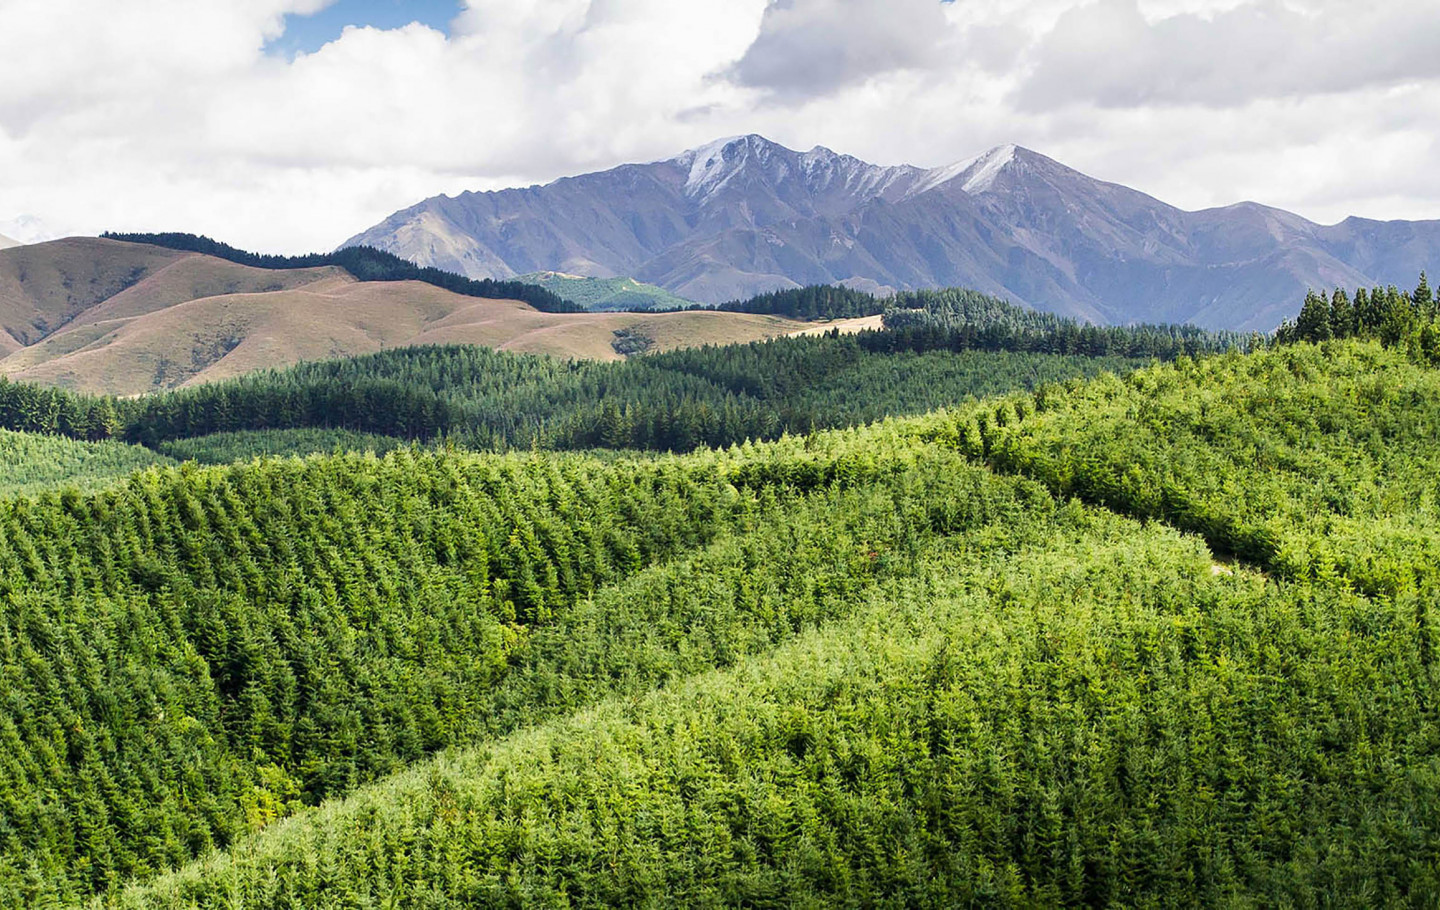 A landscape image of trees with mountains in the background